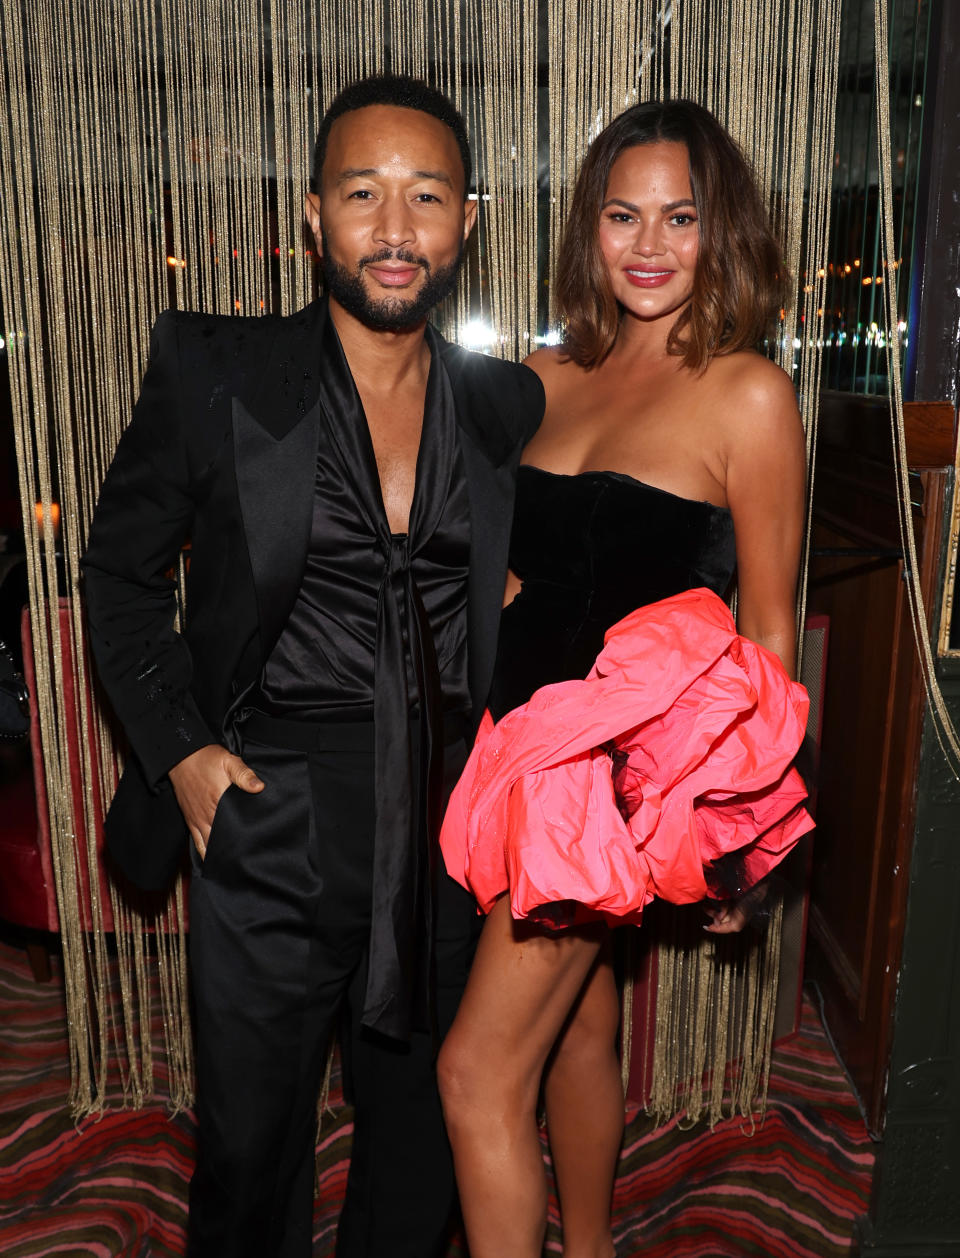 LOS ANGELES, CALIFORNIA - FEBRUARY 04: (L-R) John Legend and Chrissy Teigen attend W Magazine, Mark Ronson, and Gucci's Grammy After-Party at Bar Marmont on February 04, 2024 in Los Angeles, California. (Photo by Jerritt Clark/Getty Images for W Magazine)